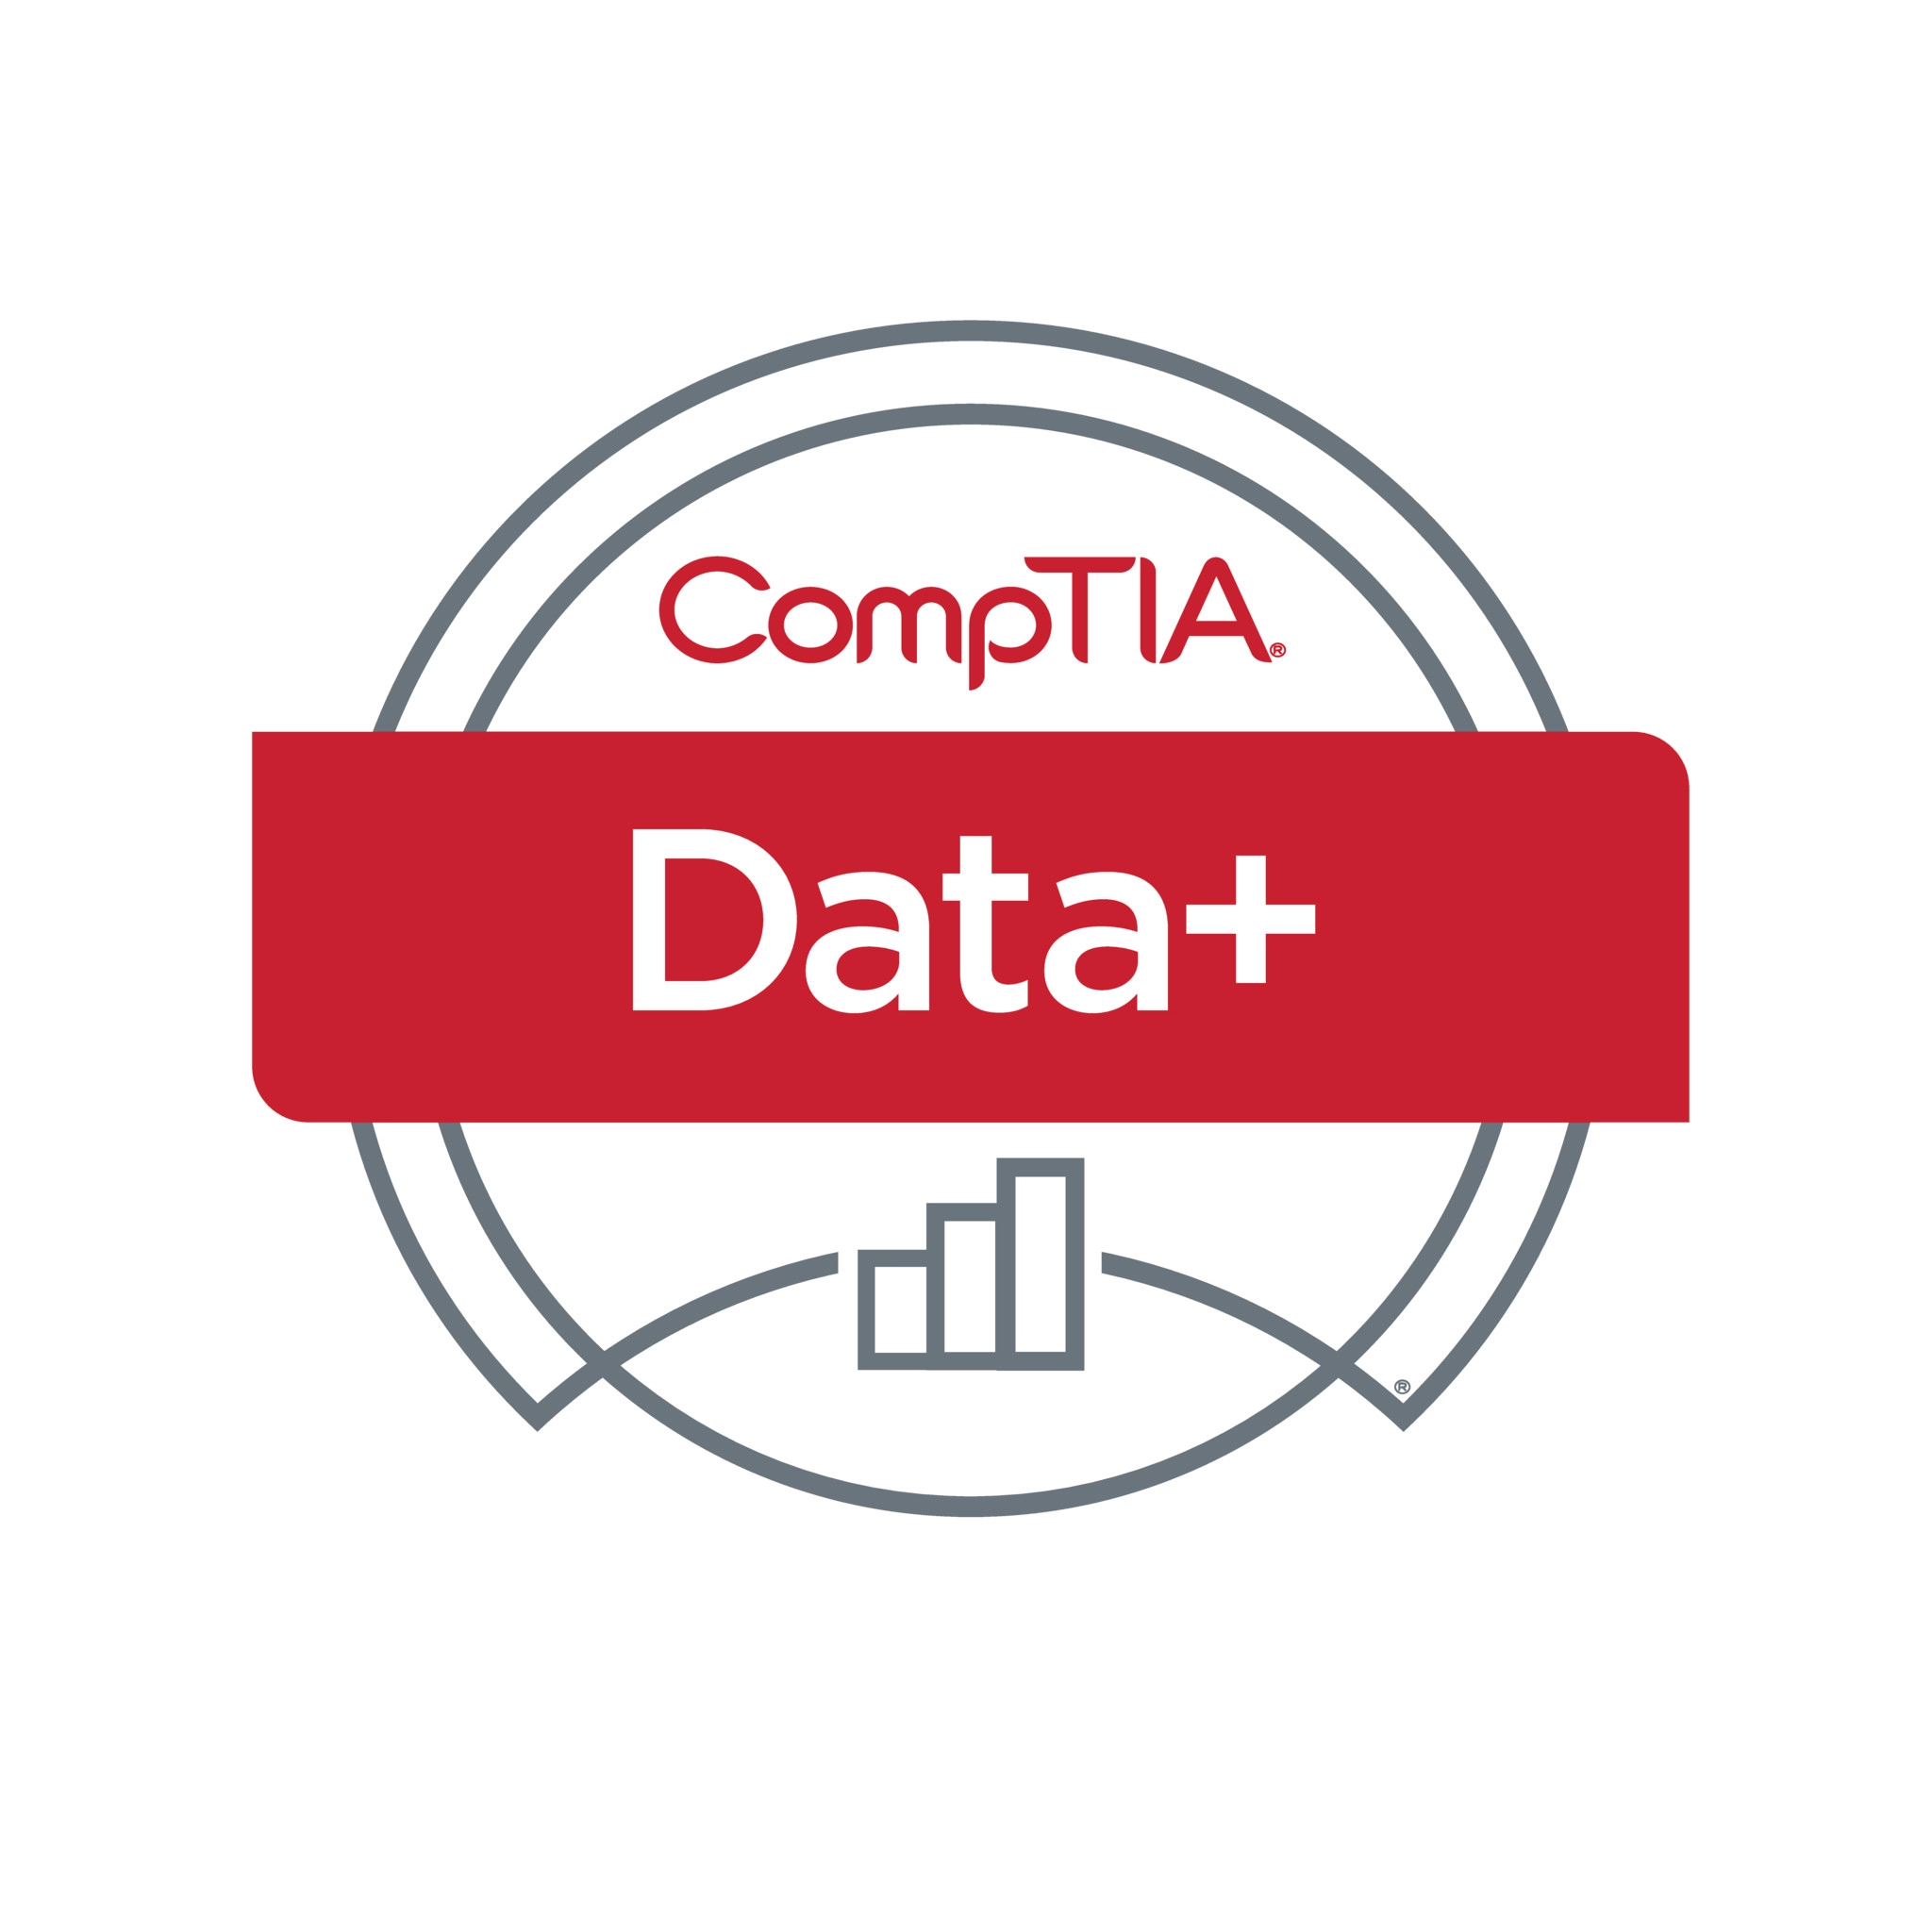 CompTIA Data+ training and certification course